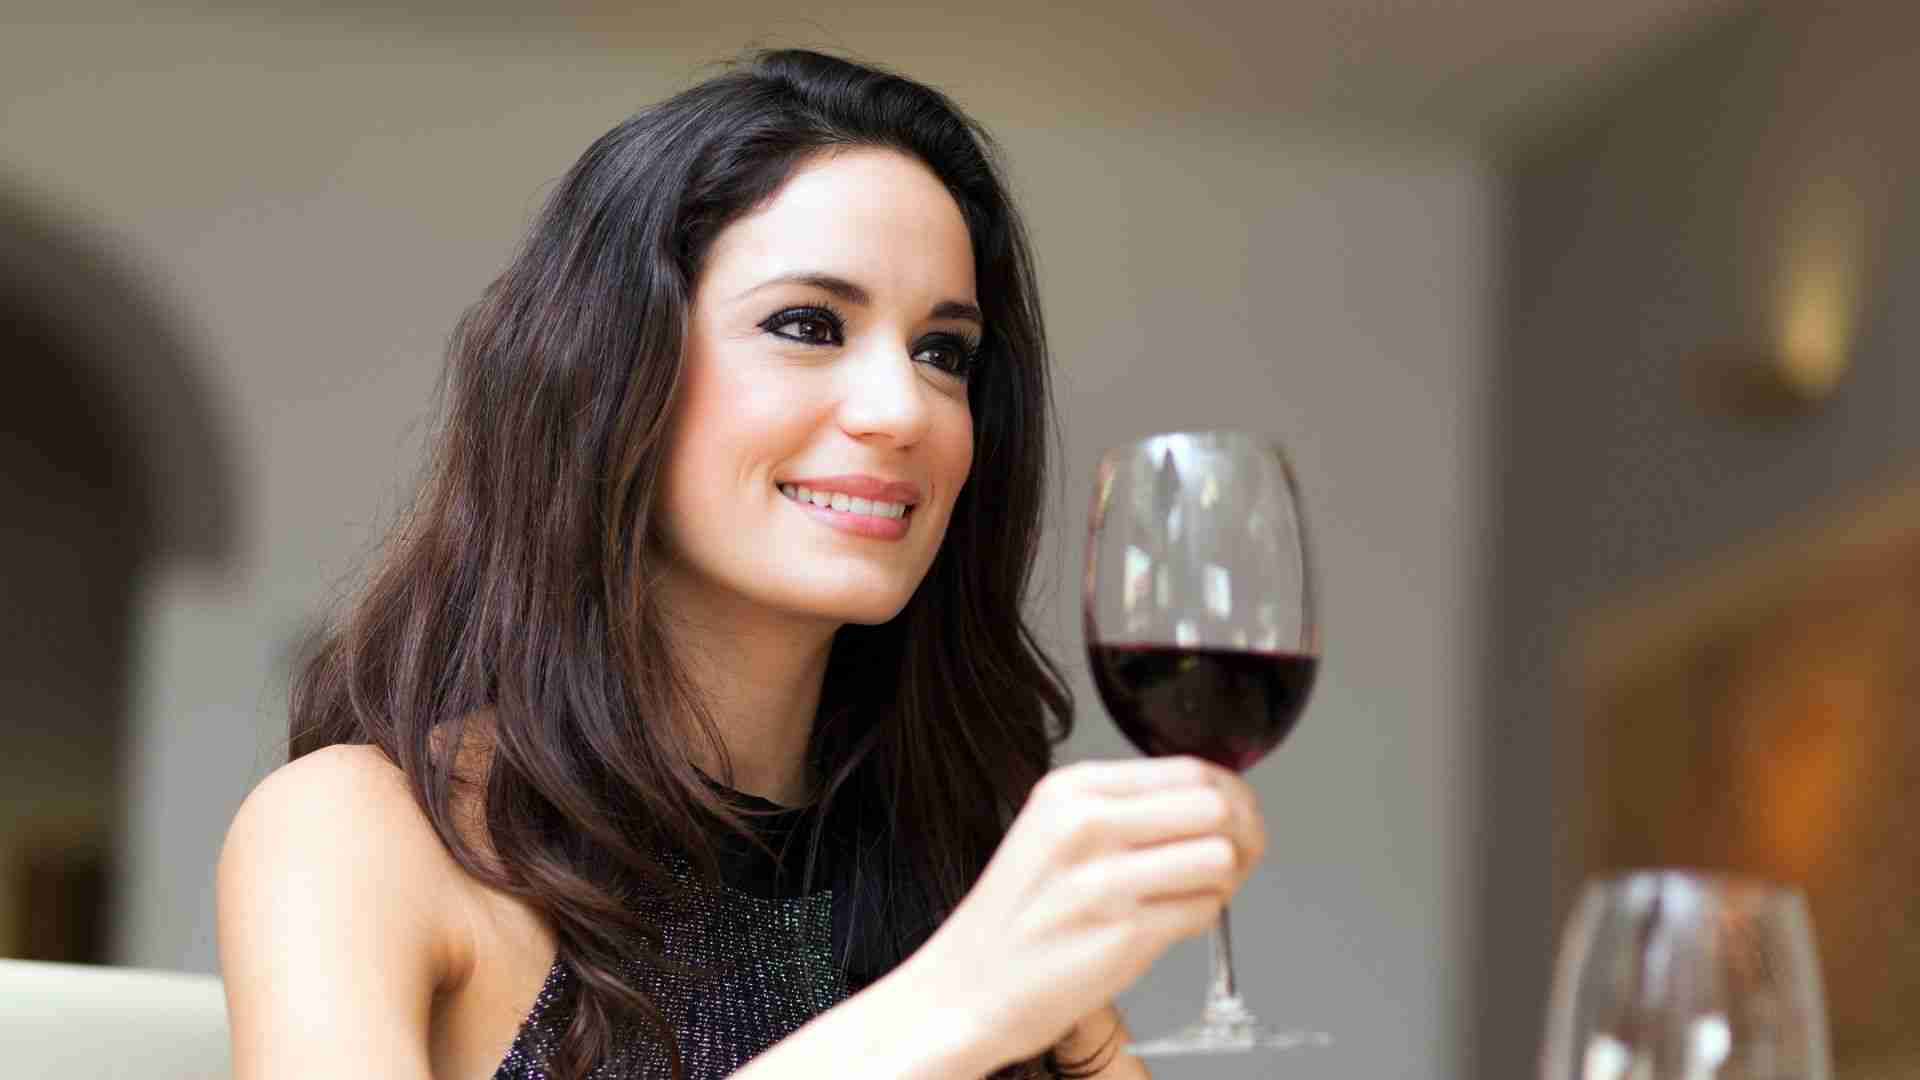 A person drinking wine